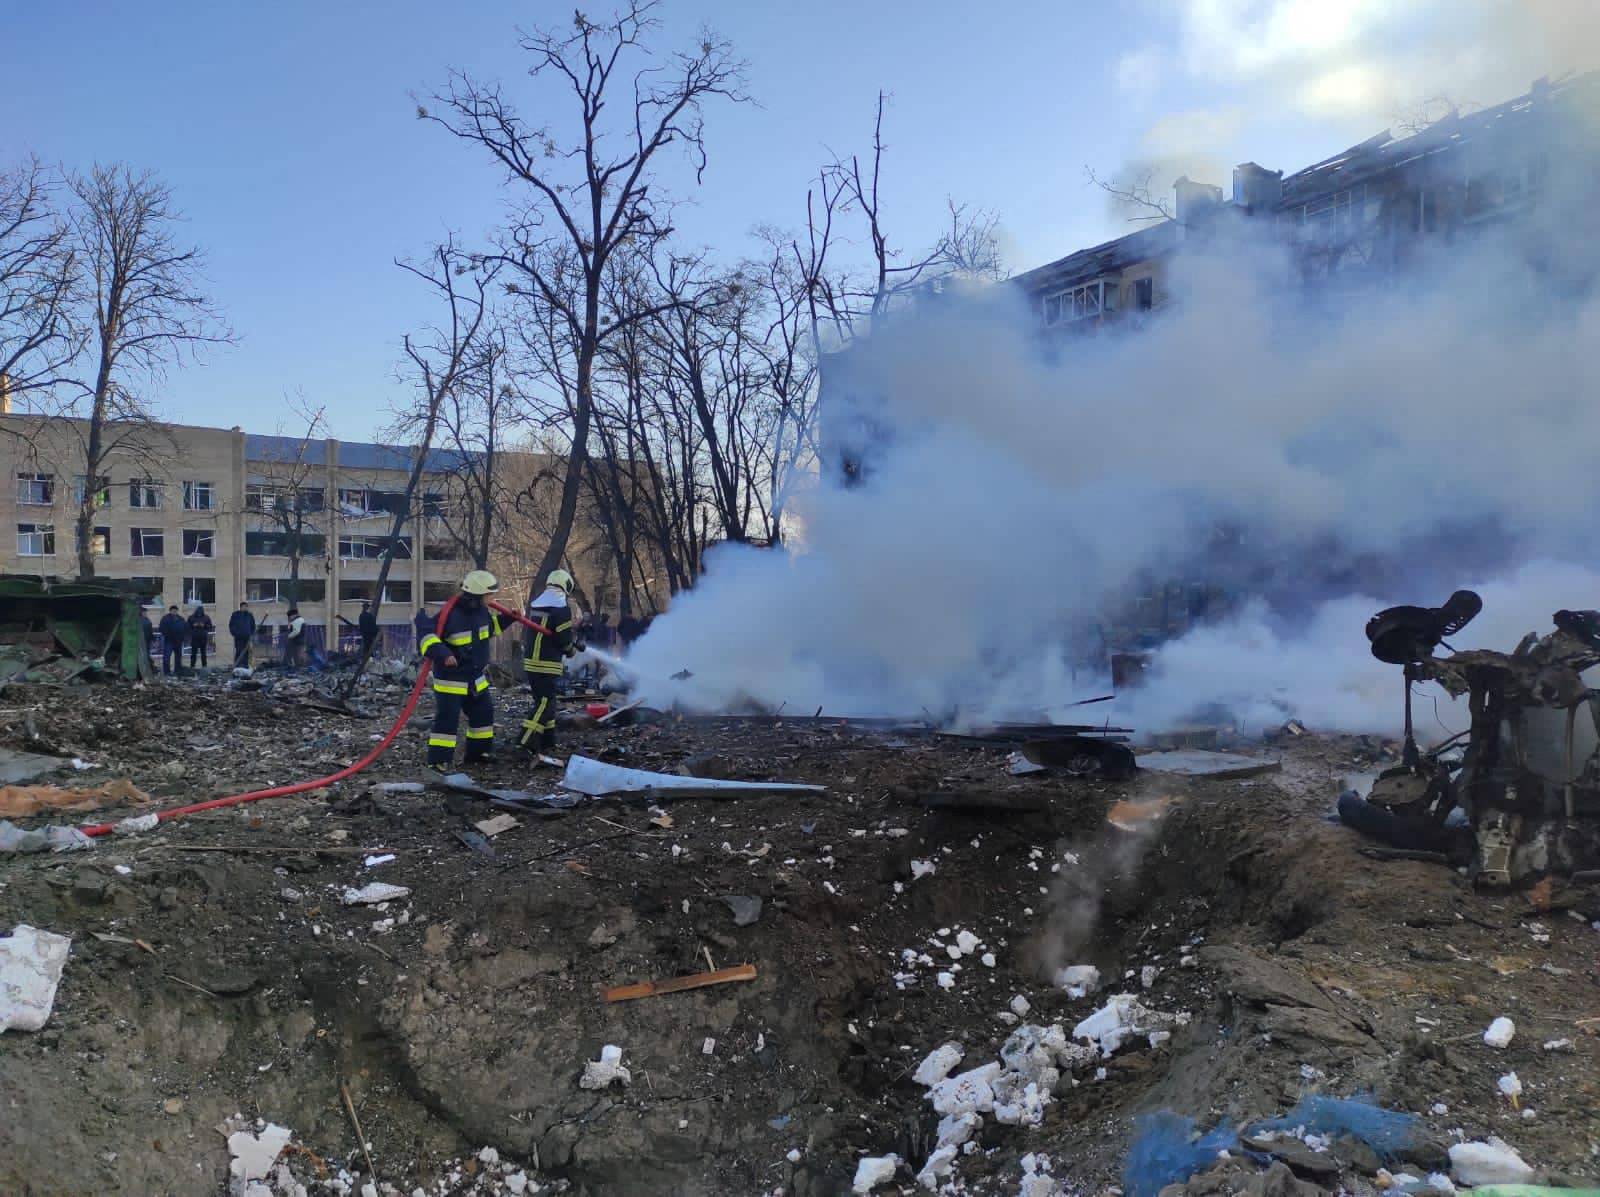 Rescuers work in an area damaged by shelling in Kyiv